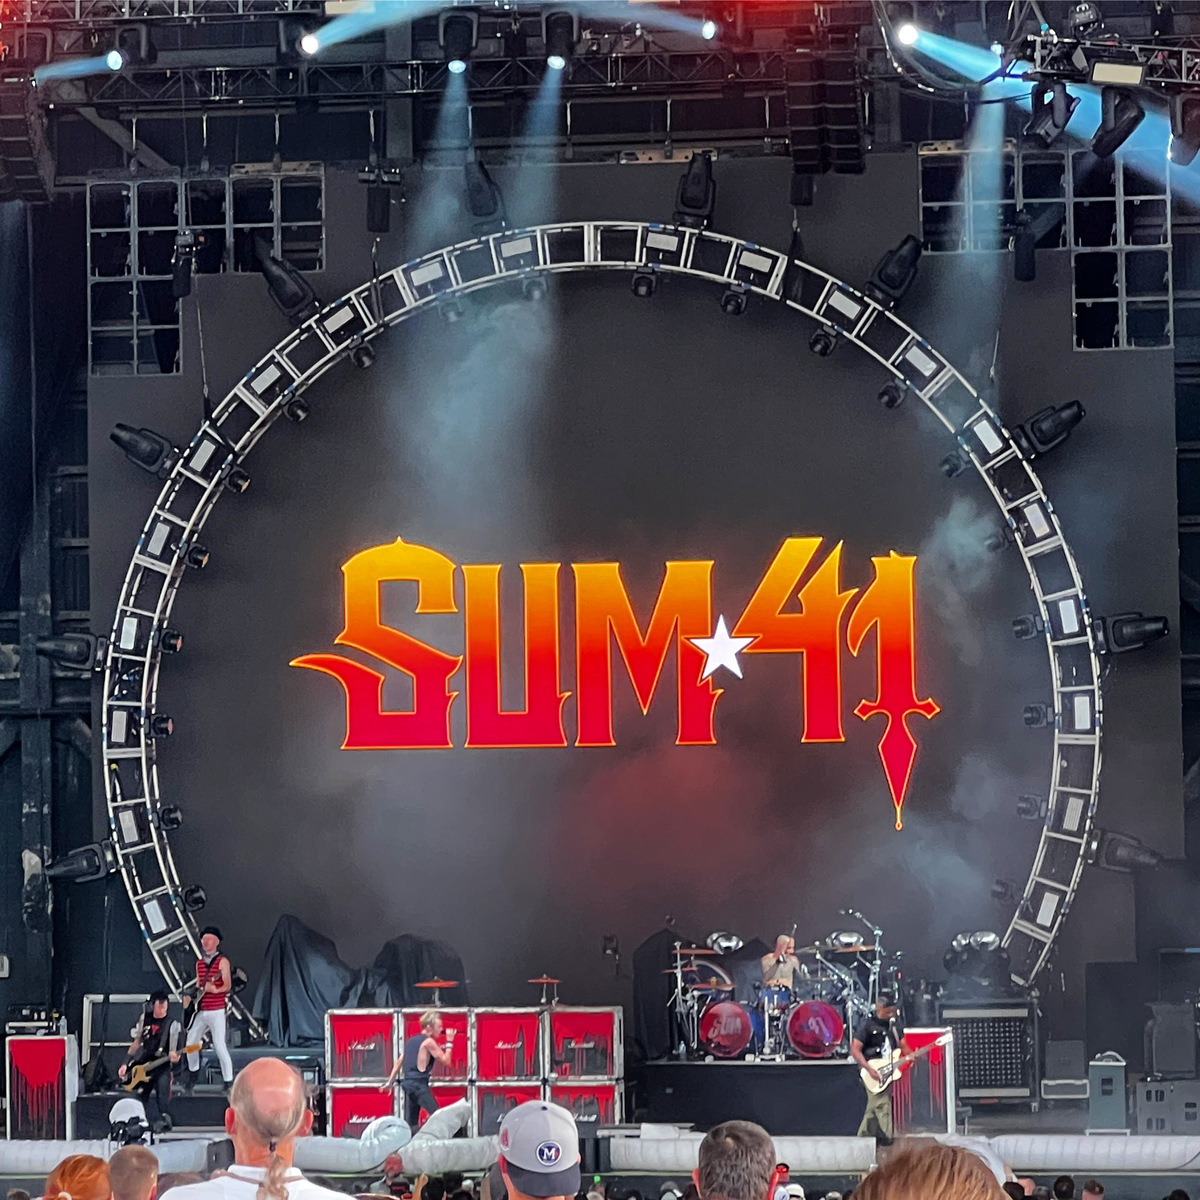 Sum 41 performing Over My Head (Better Off Dead) at the Tampa stop of